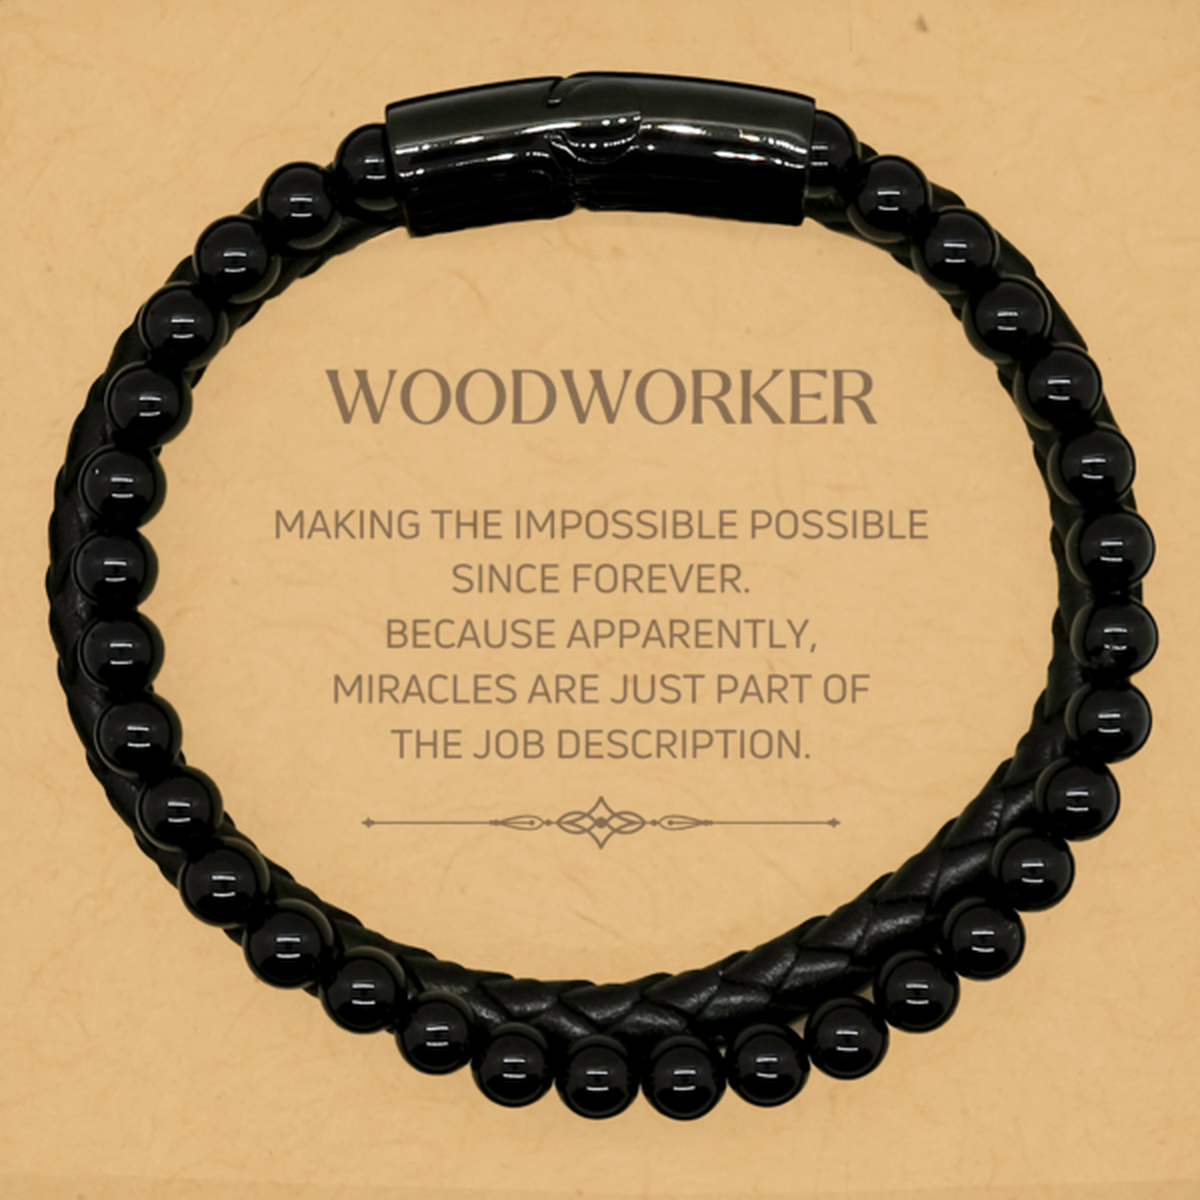 Funny Woodworker Gifts, Miracles are just part of the job description, Inspirational Birthday Stone Leather Bracelets For Woodworker, Men, Women, Coworkers, Friends, Boss